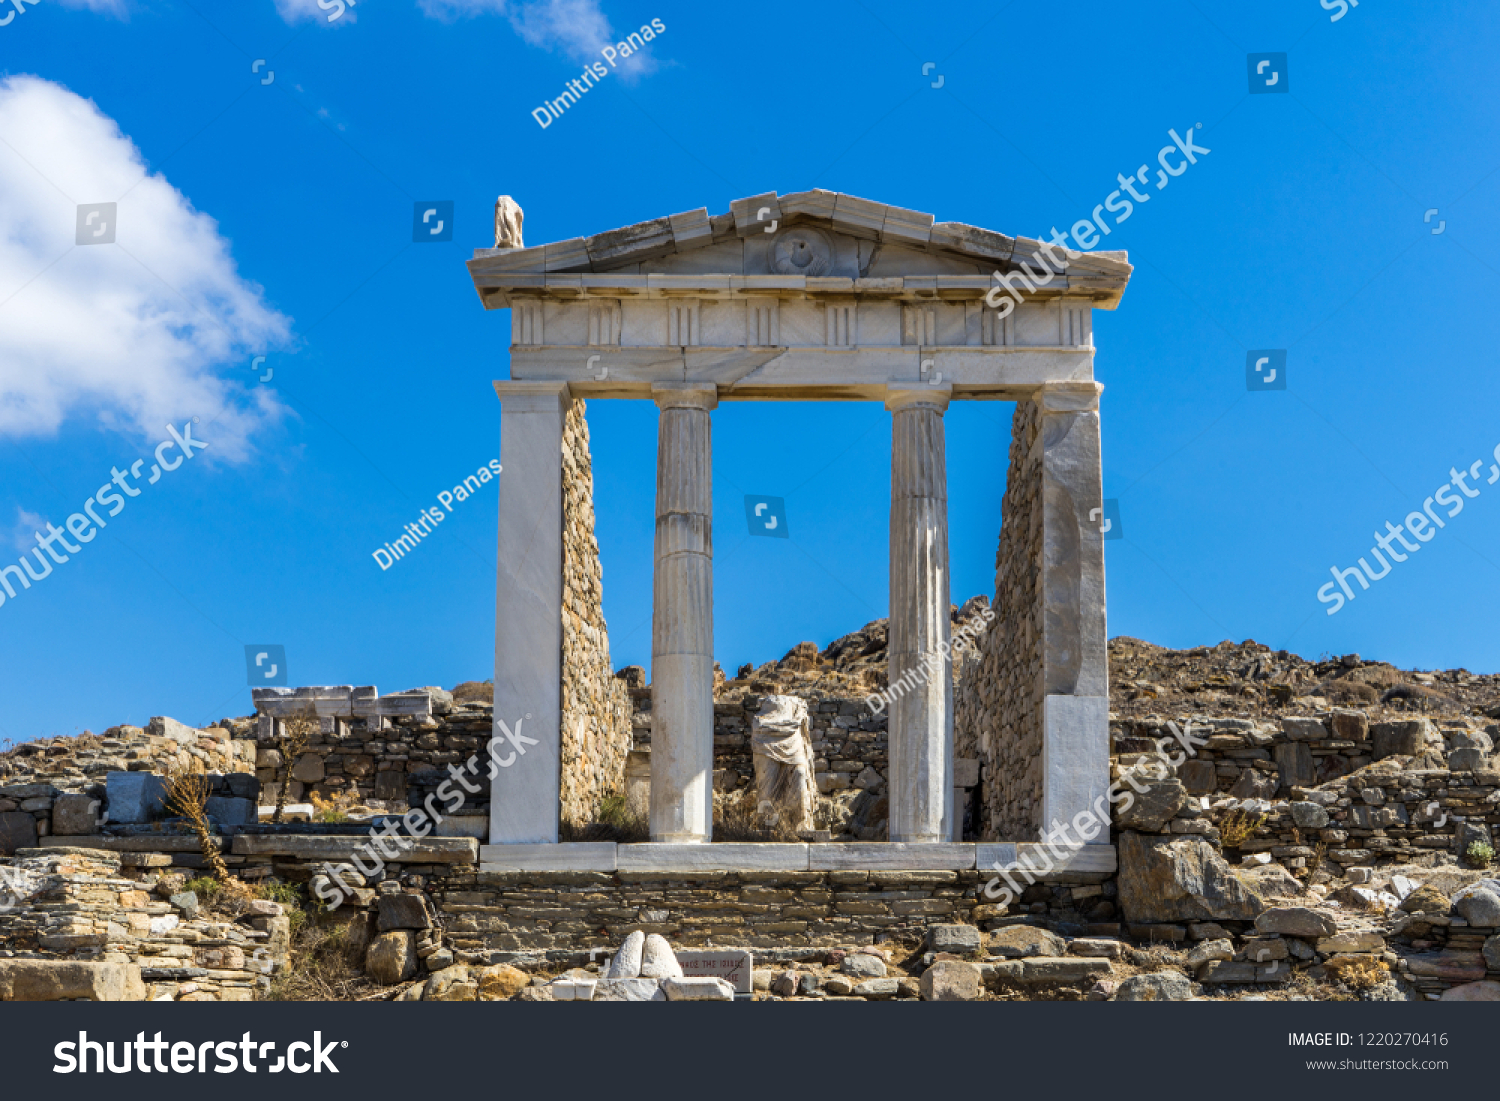 The ancient monuments and ruins on the sacred island of Delos, Greece. The birth place of god Apollo.  #1220270416